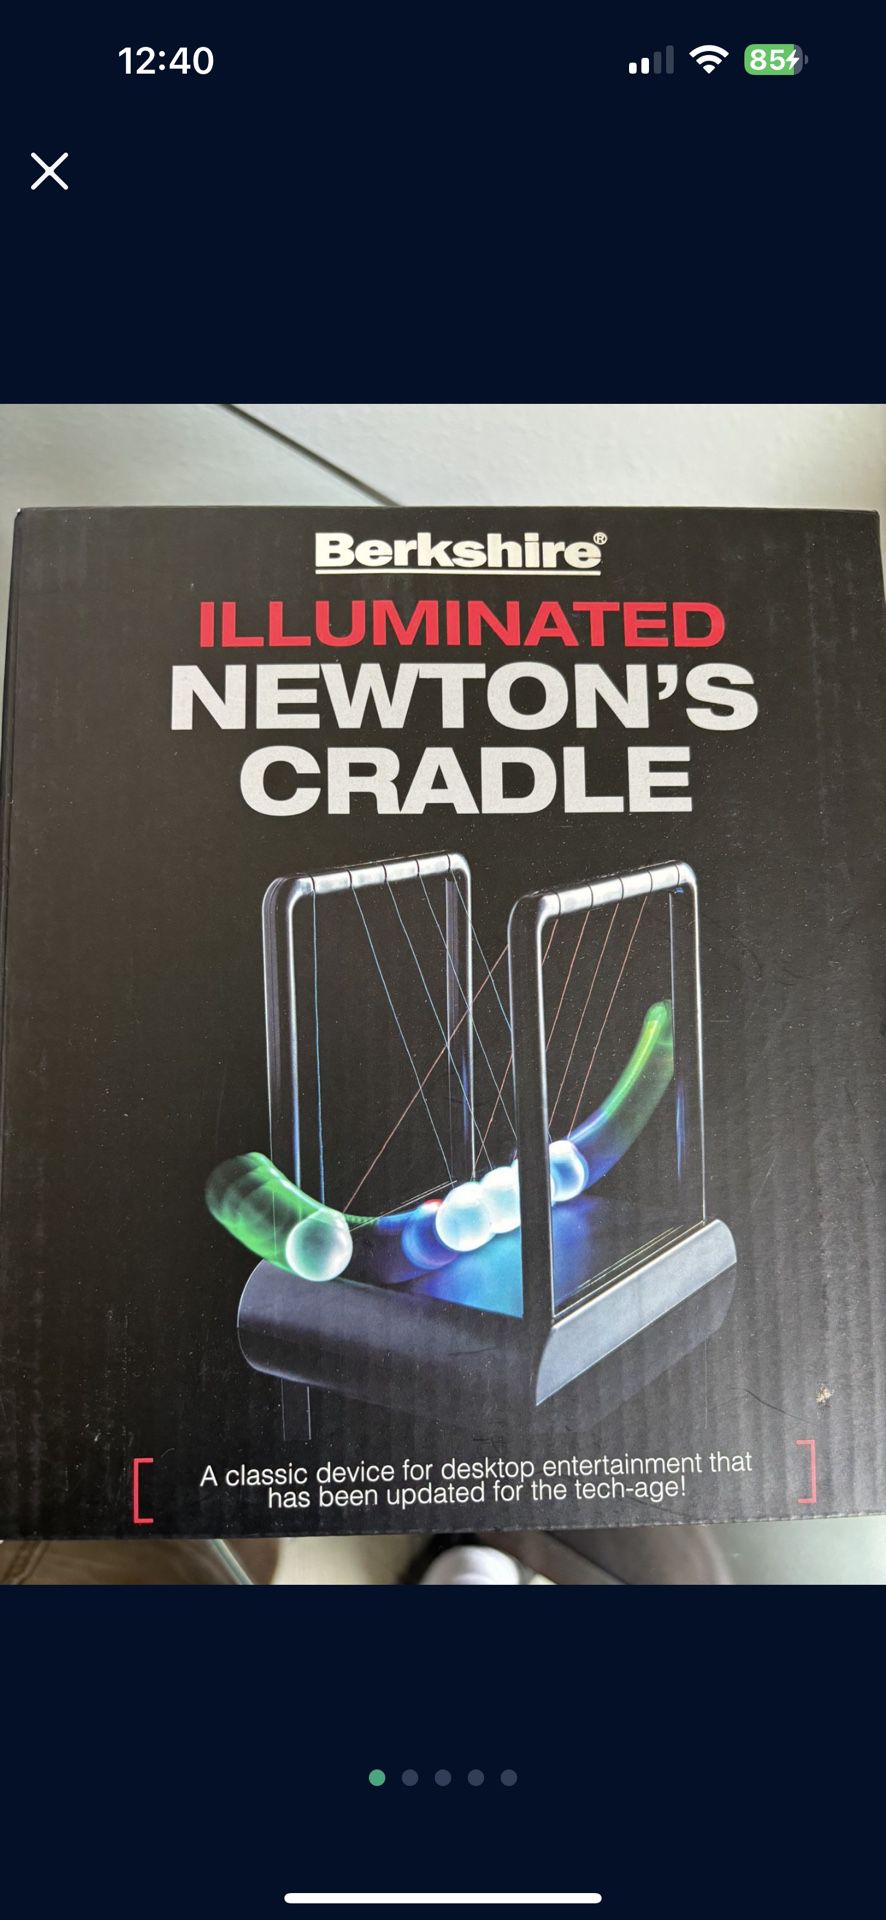 Berkshire and illuminated newton’s cradle new in the box